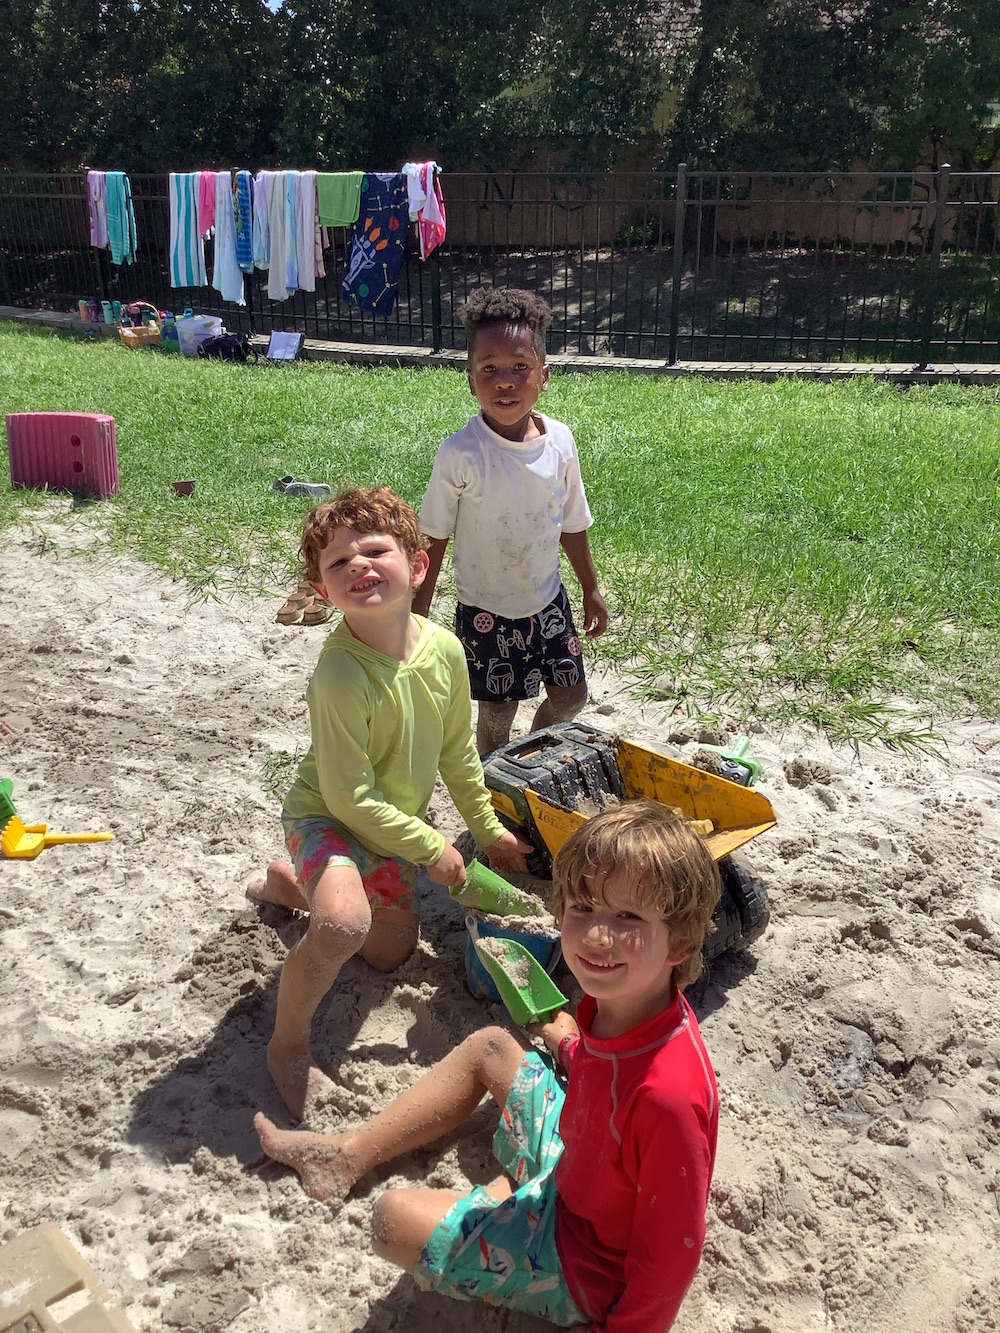 A group of children playing in the sand.